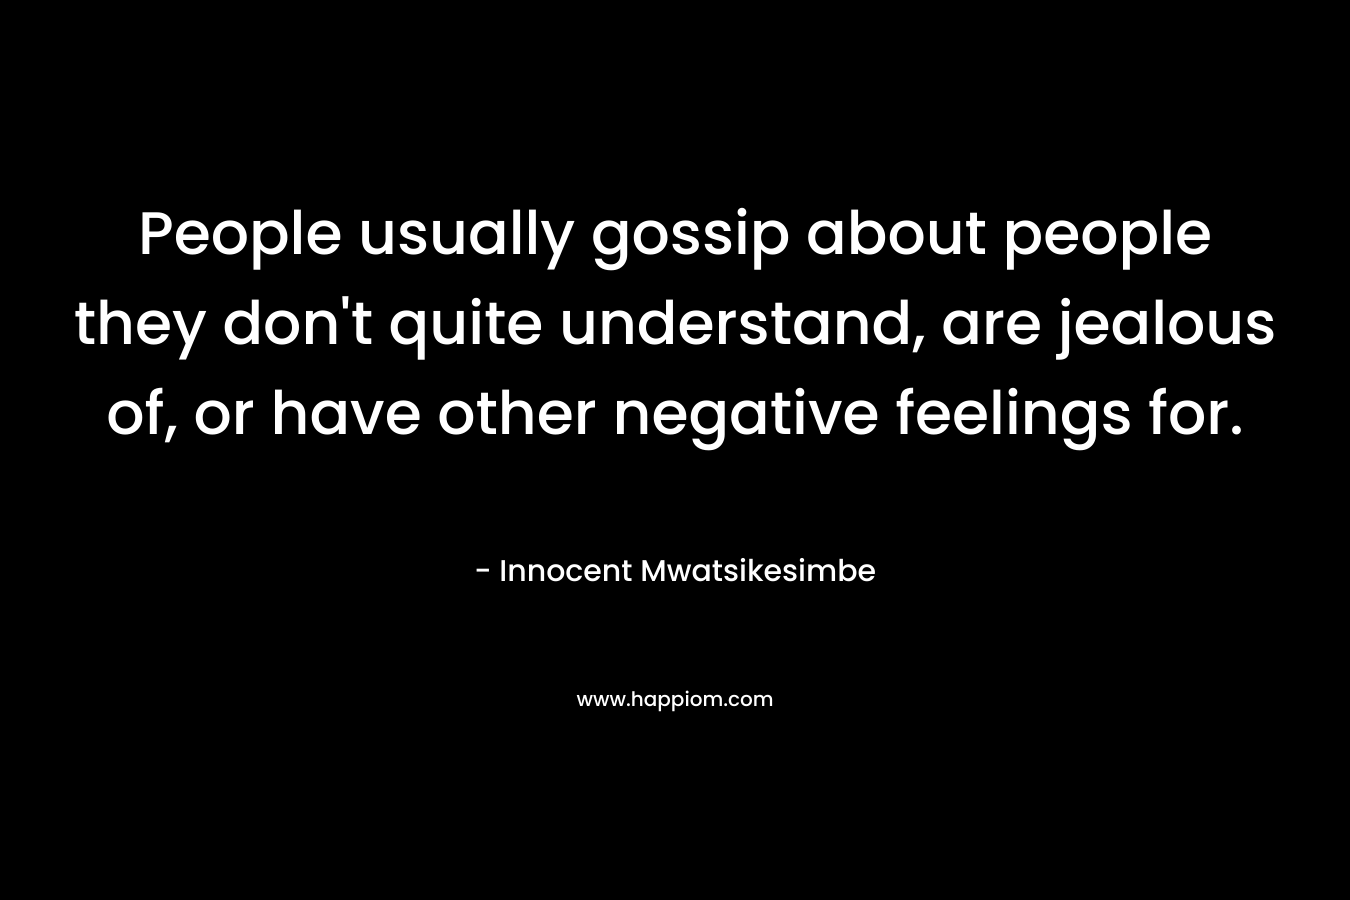 People usually gossip about people they don't quite understand, are jealous of, or have other negative feelings for.